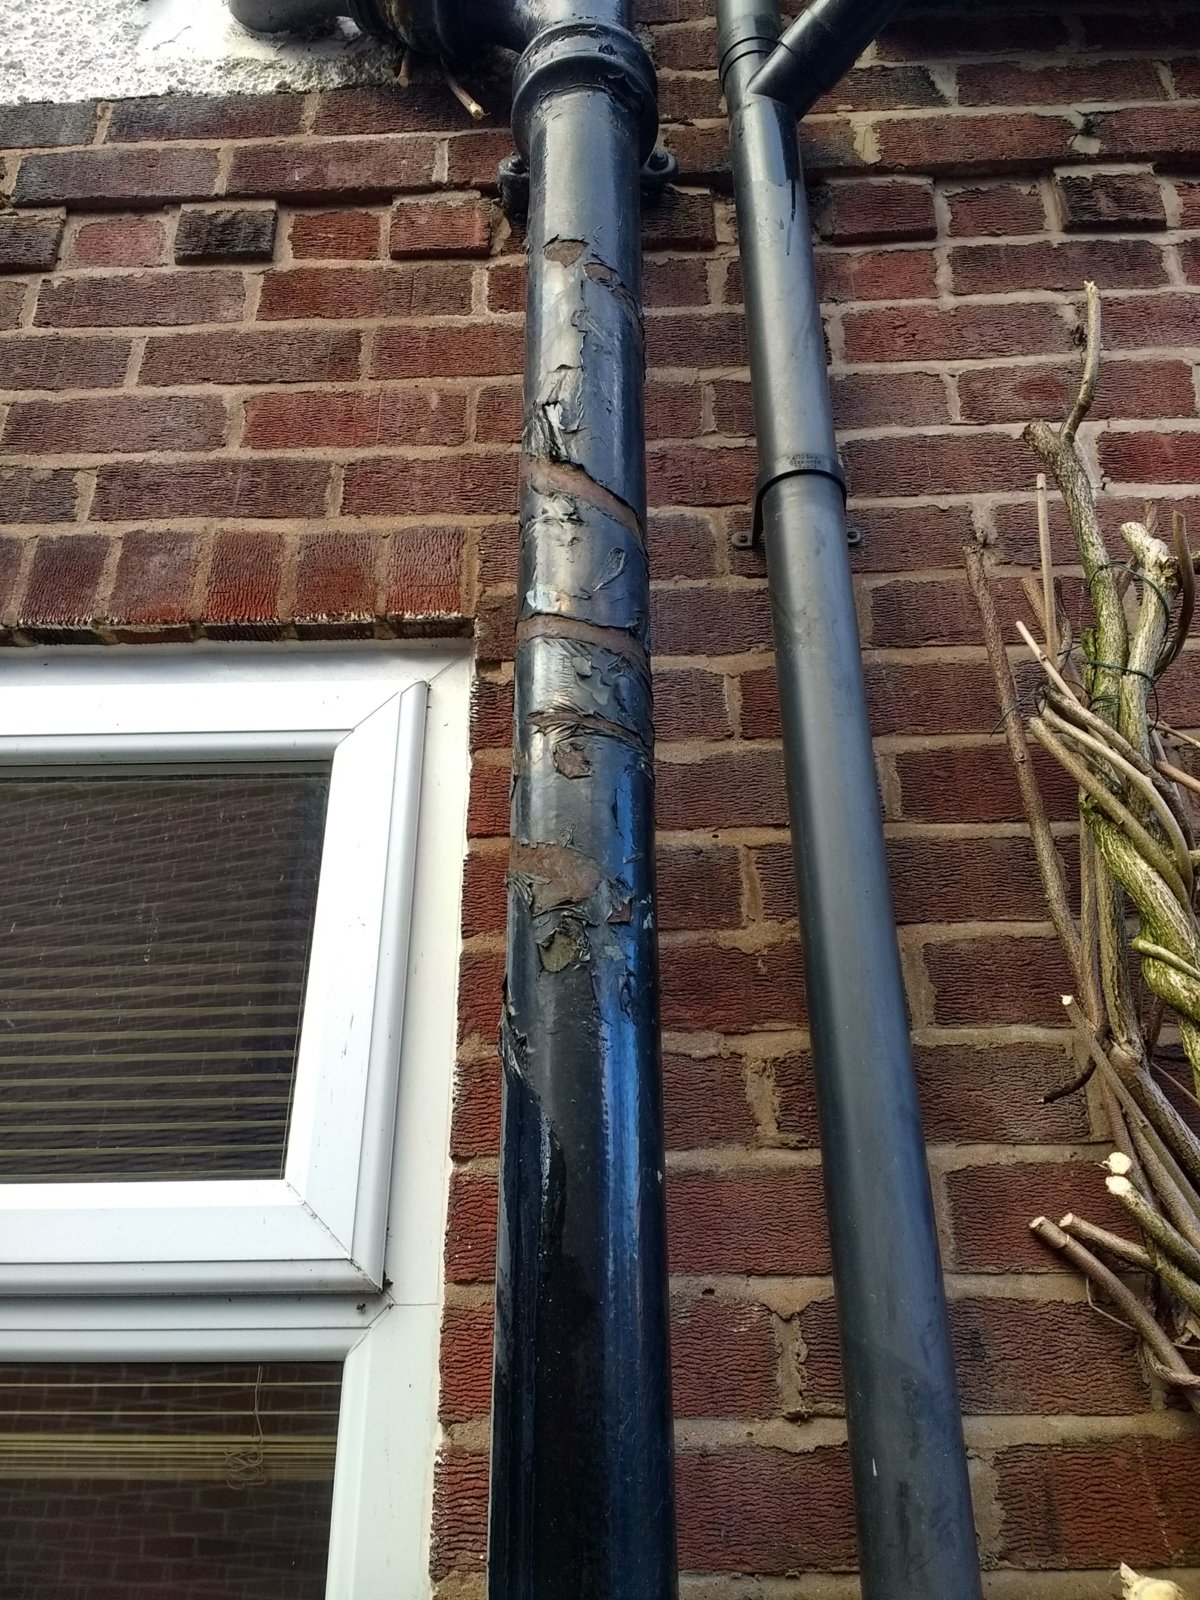 Painting Cast Iron Soil Pipe Diynot Forums